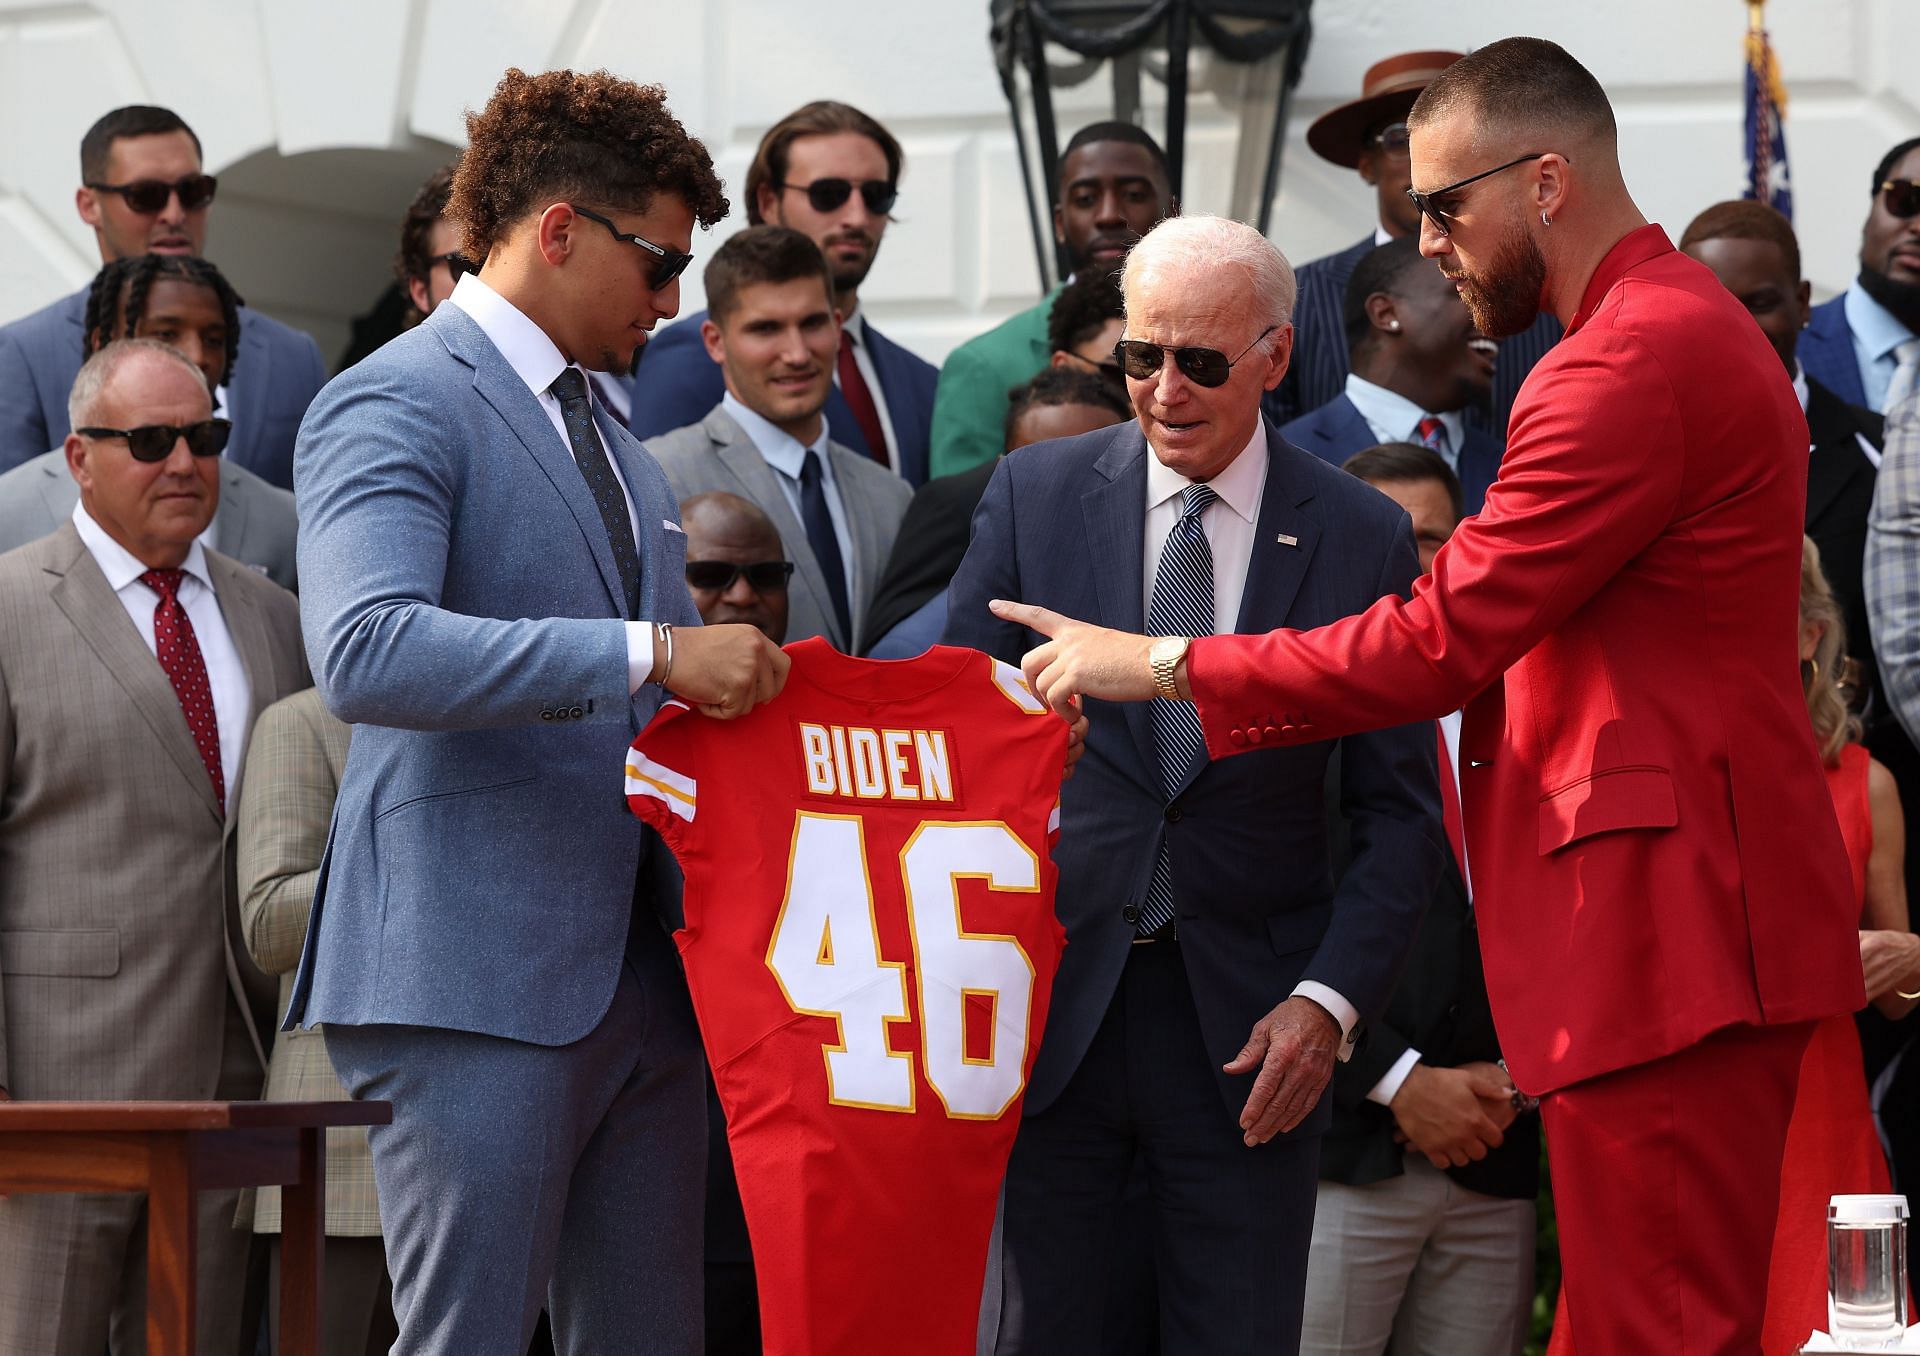 Super Bowl Champs Patrick Mahomes and Travis Kelce Don Rolex